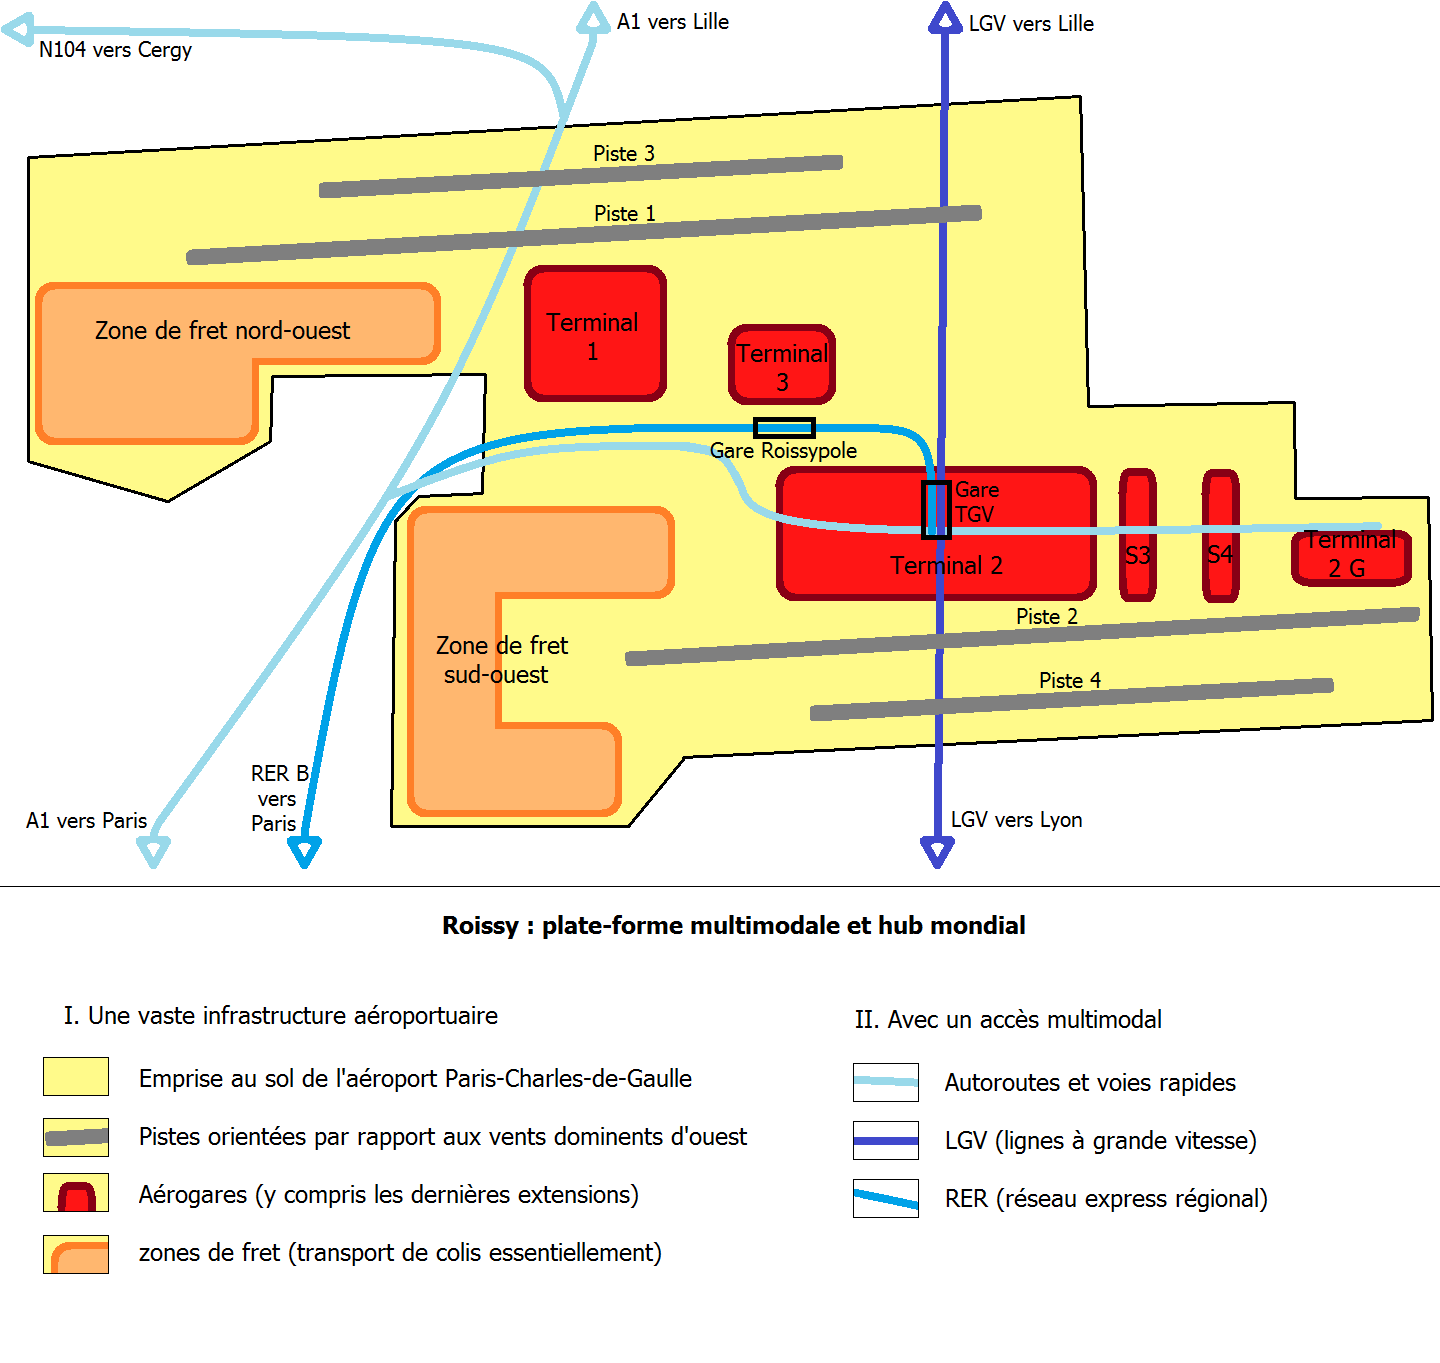 Paris Airports, Guide to CDG